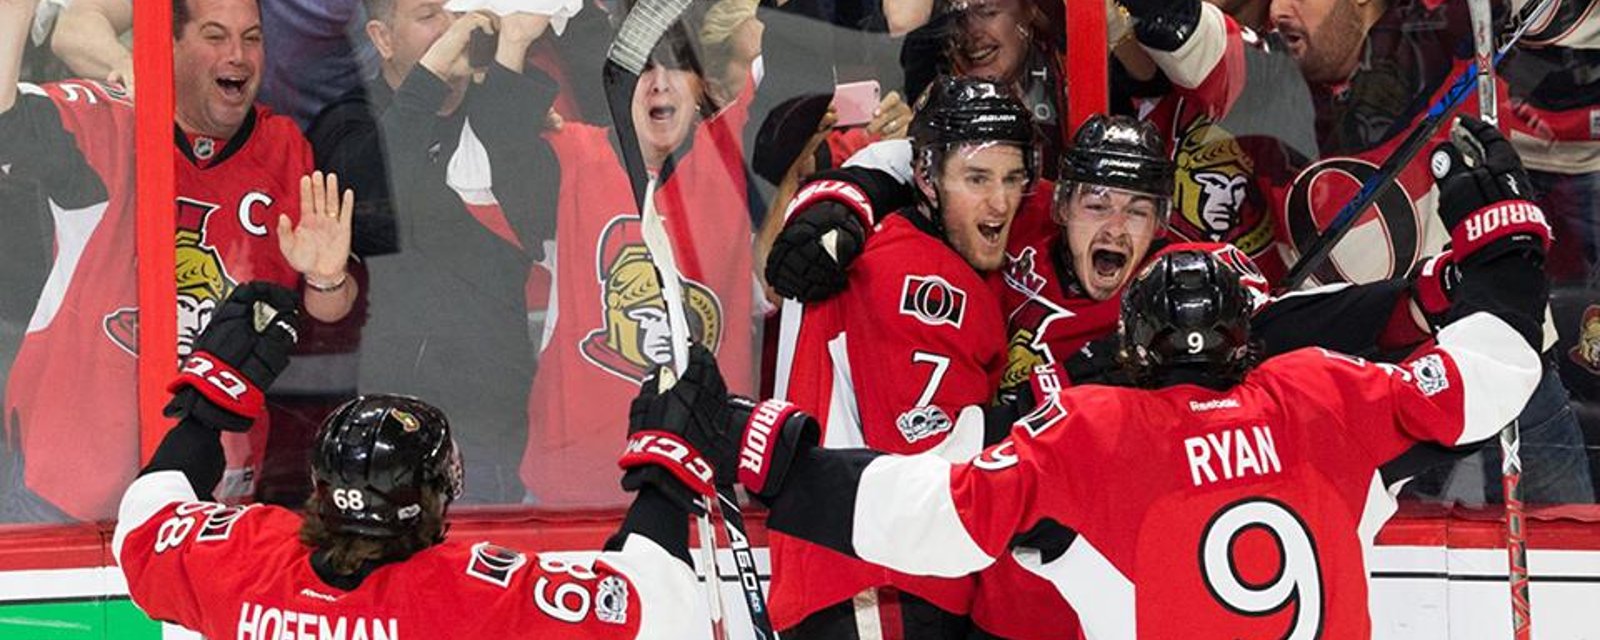 Contract extension imminent for Kyle Turris?